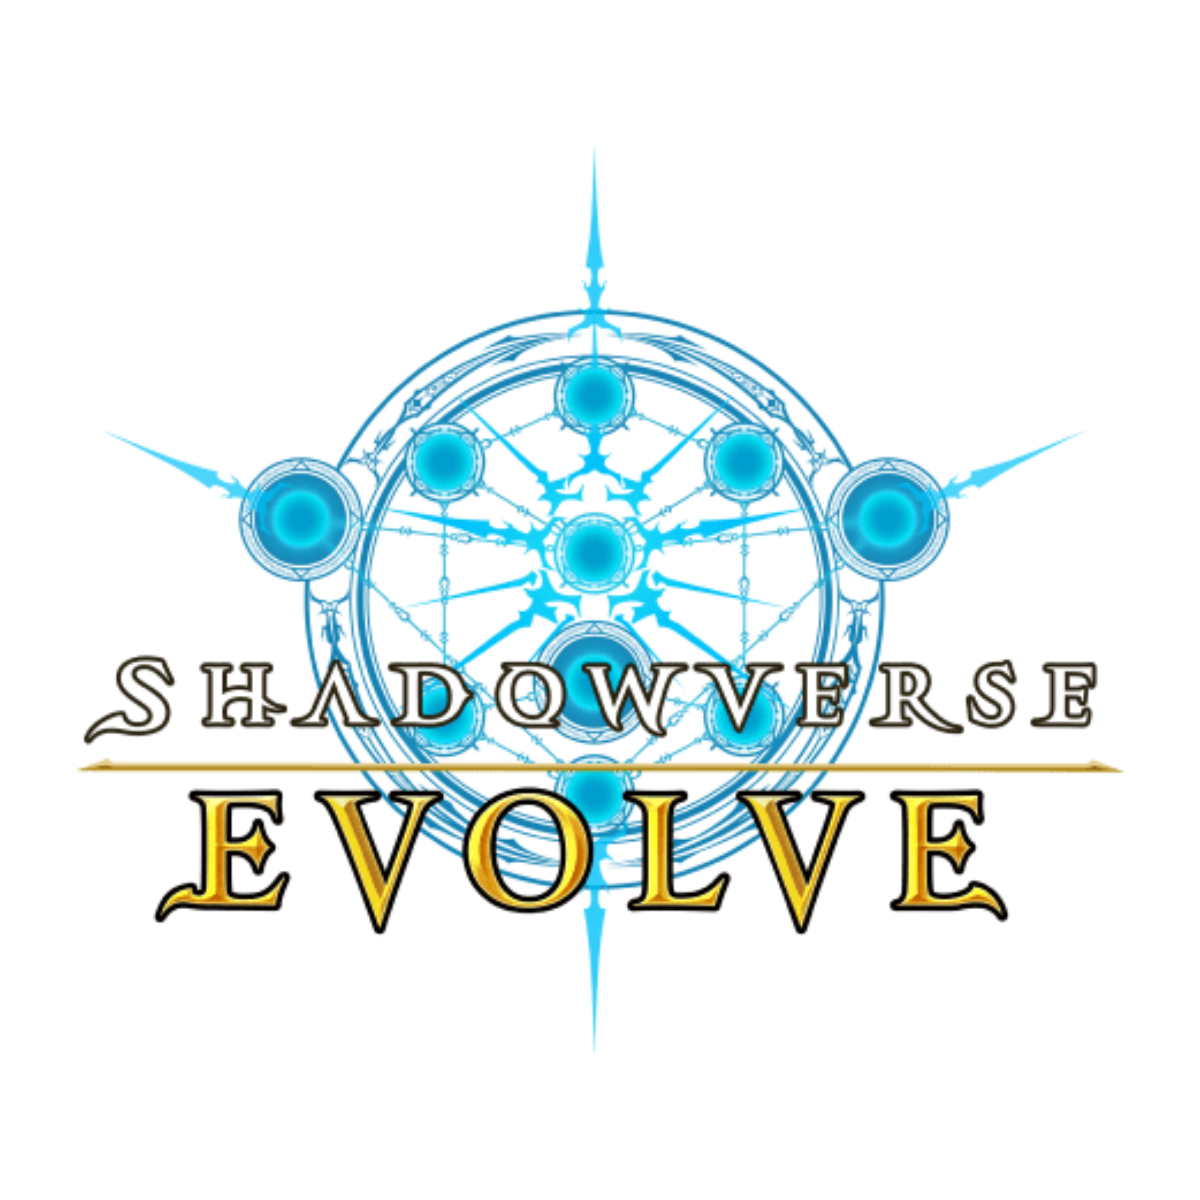 Shadowverse Evolve Official Sleeve - The Idolmaster &quot;Akari Tsujino&quot; (Vol.99)-Shadowverse-Ace Cards &amp; Collectibles